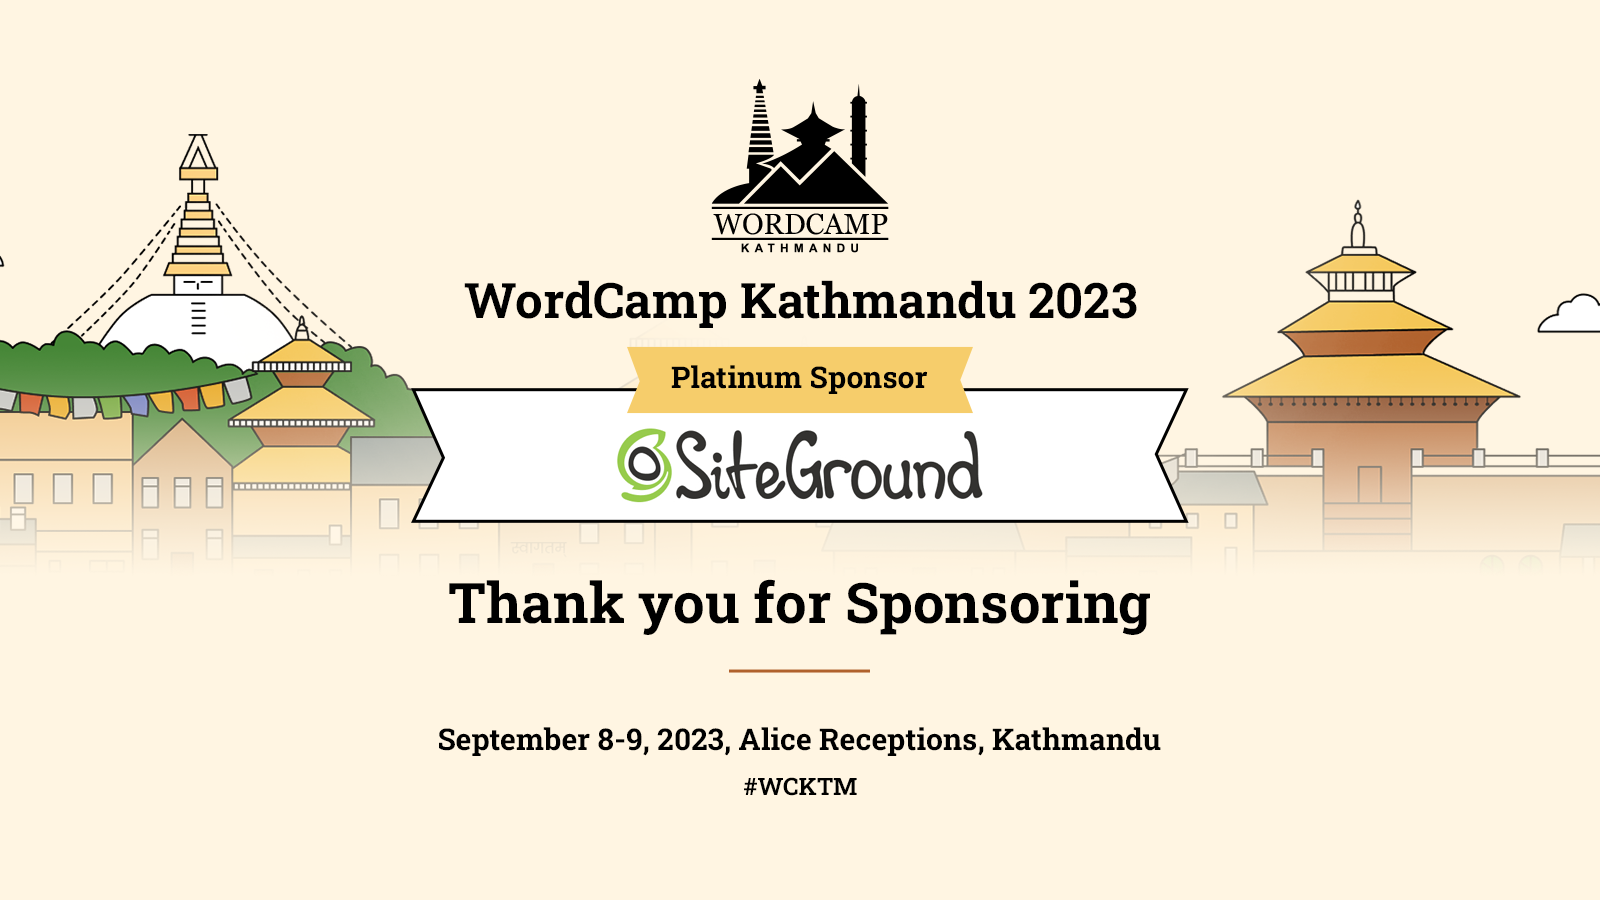 Thank you SiteGround for sponsoring